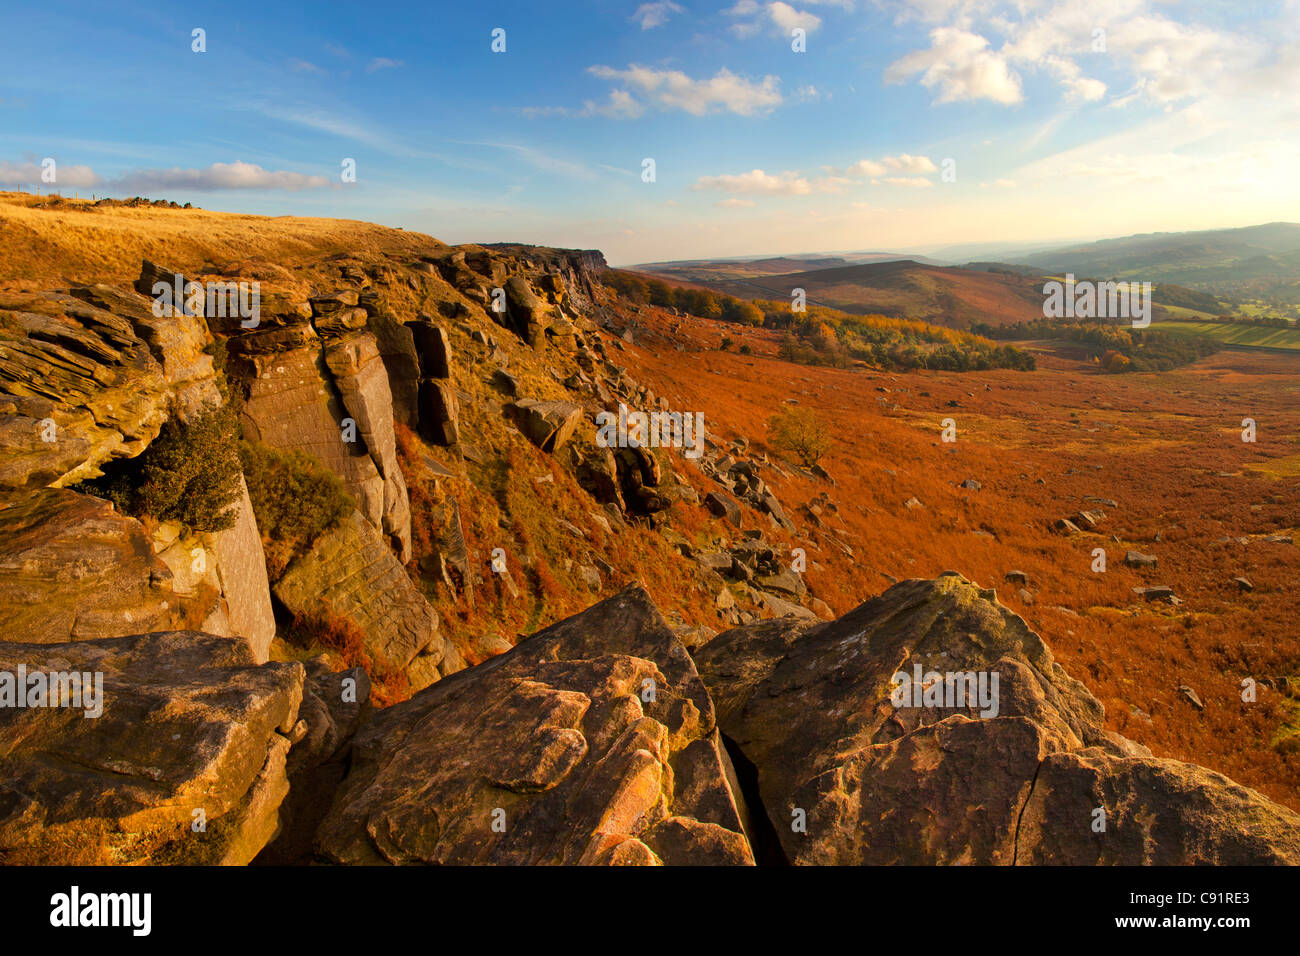 Stanage Edge escarpment and views of countryside in autumn, near Hathersage, Derbyshire, Peak district, England Stock Photo